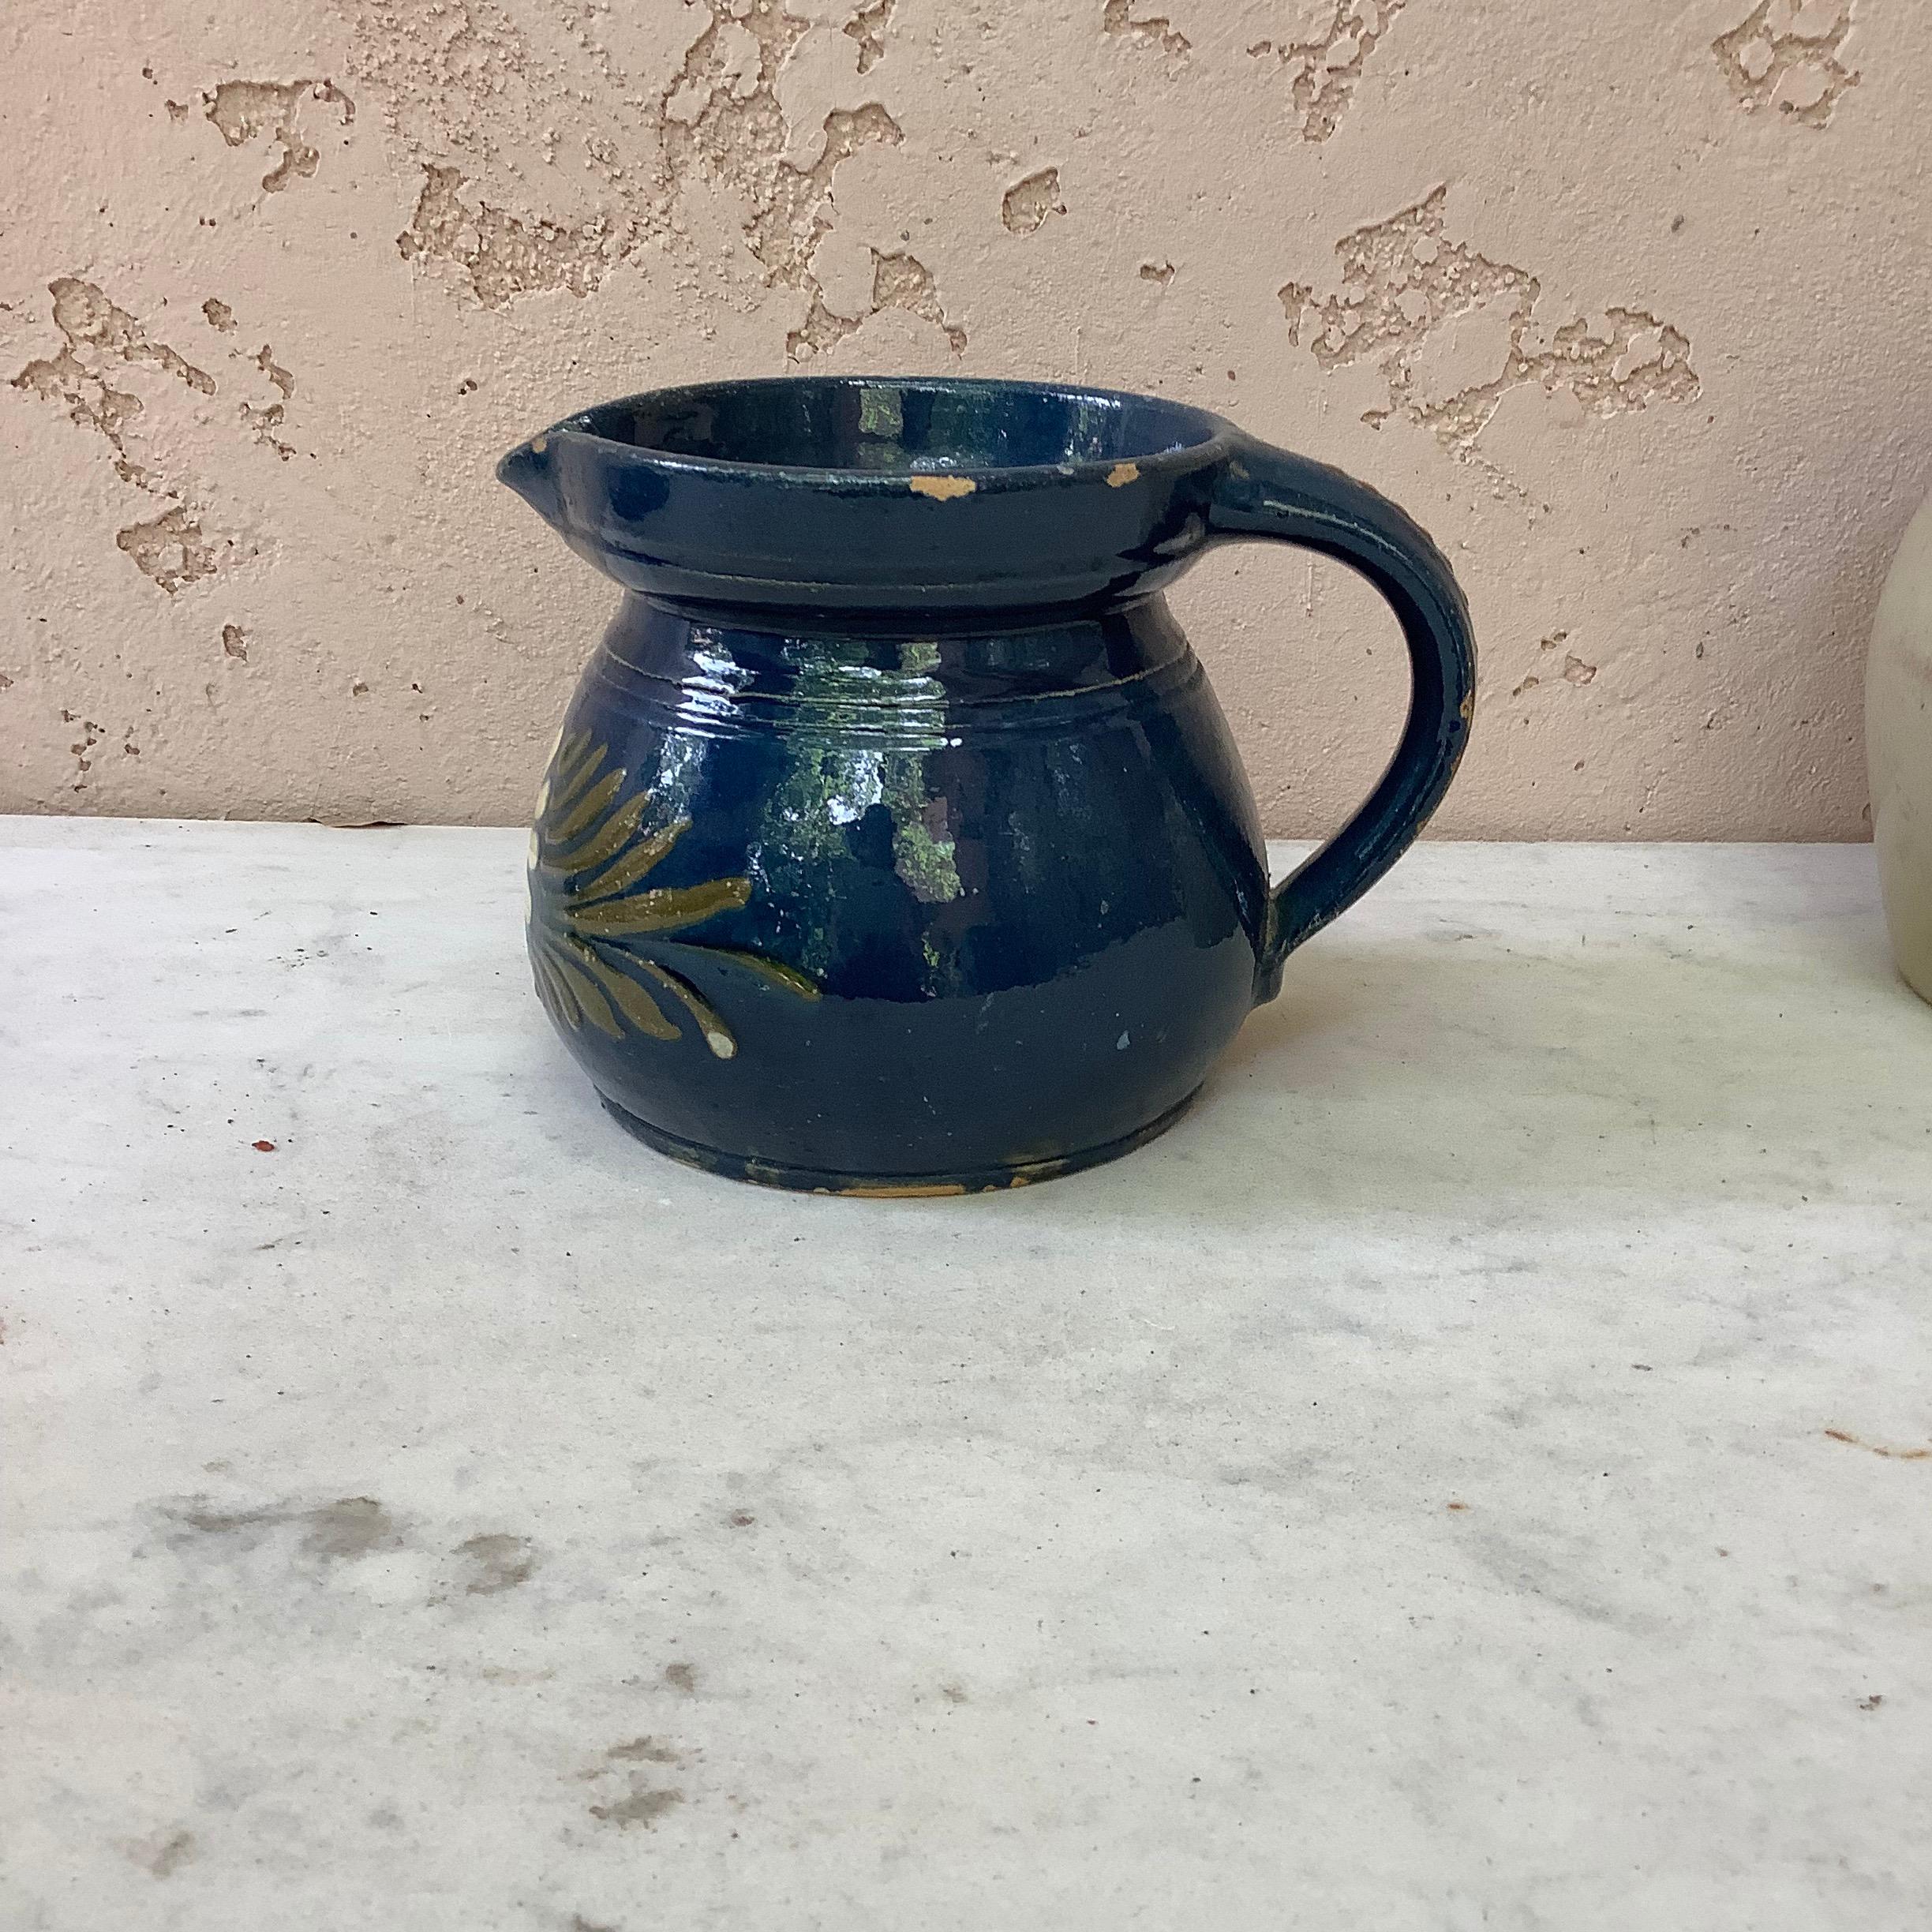 19th century blue ceramic pitcher with white flower from Savoie, France. No maker's mark. Minor wear.